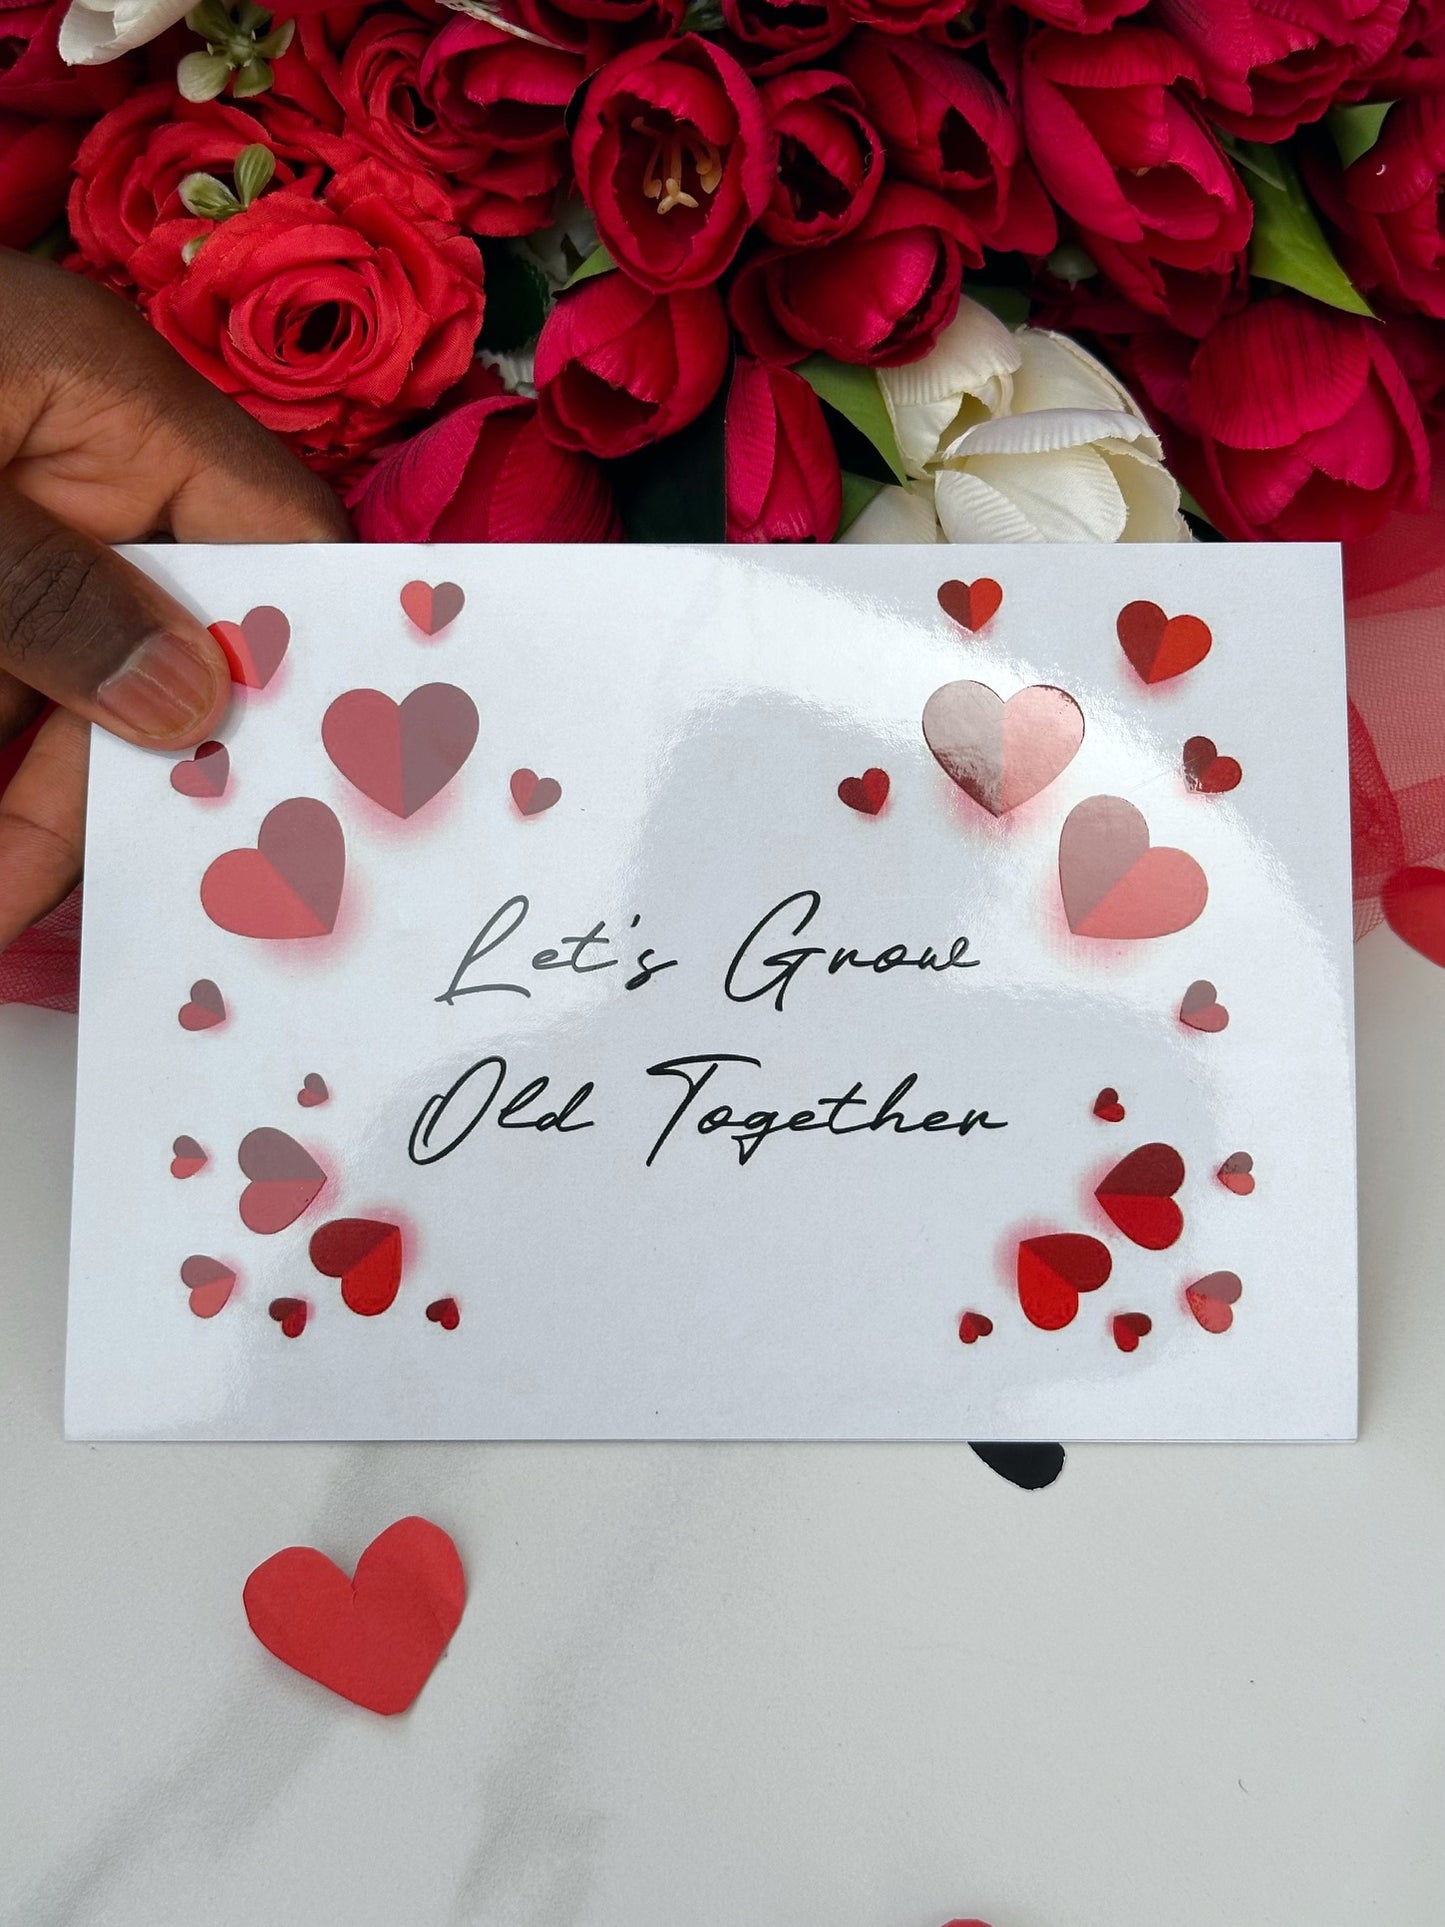 Let's Grow Old Together Card